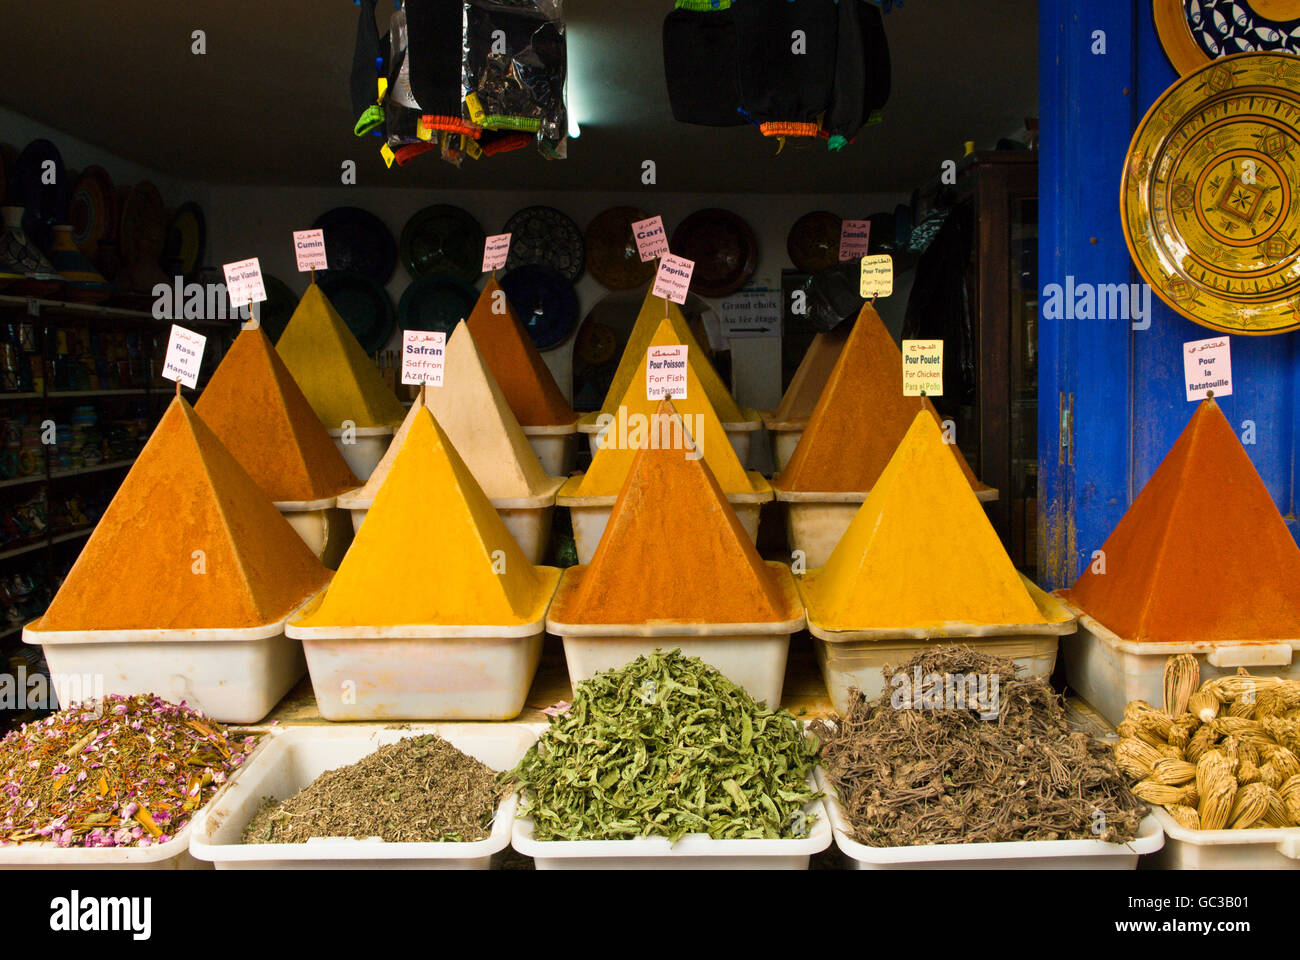 Spices for sale in shop, Marrakesh, Morocco, Africa Stock Photo